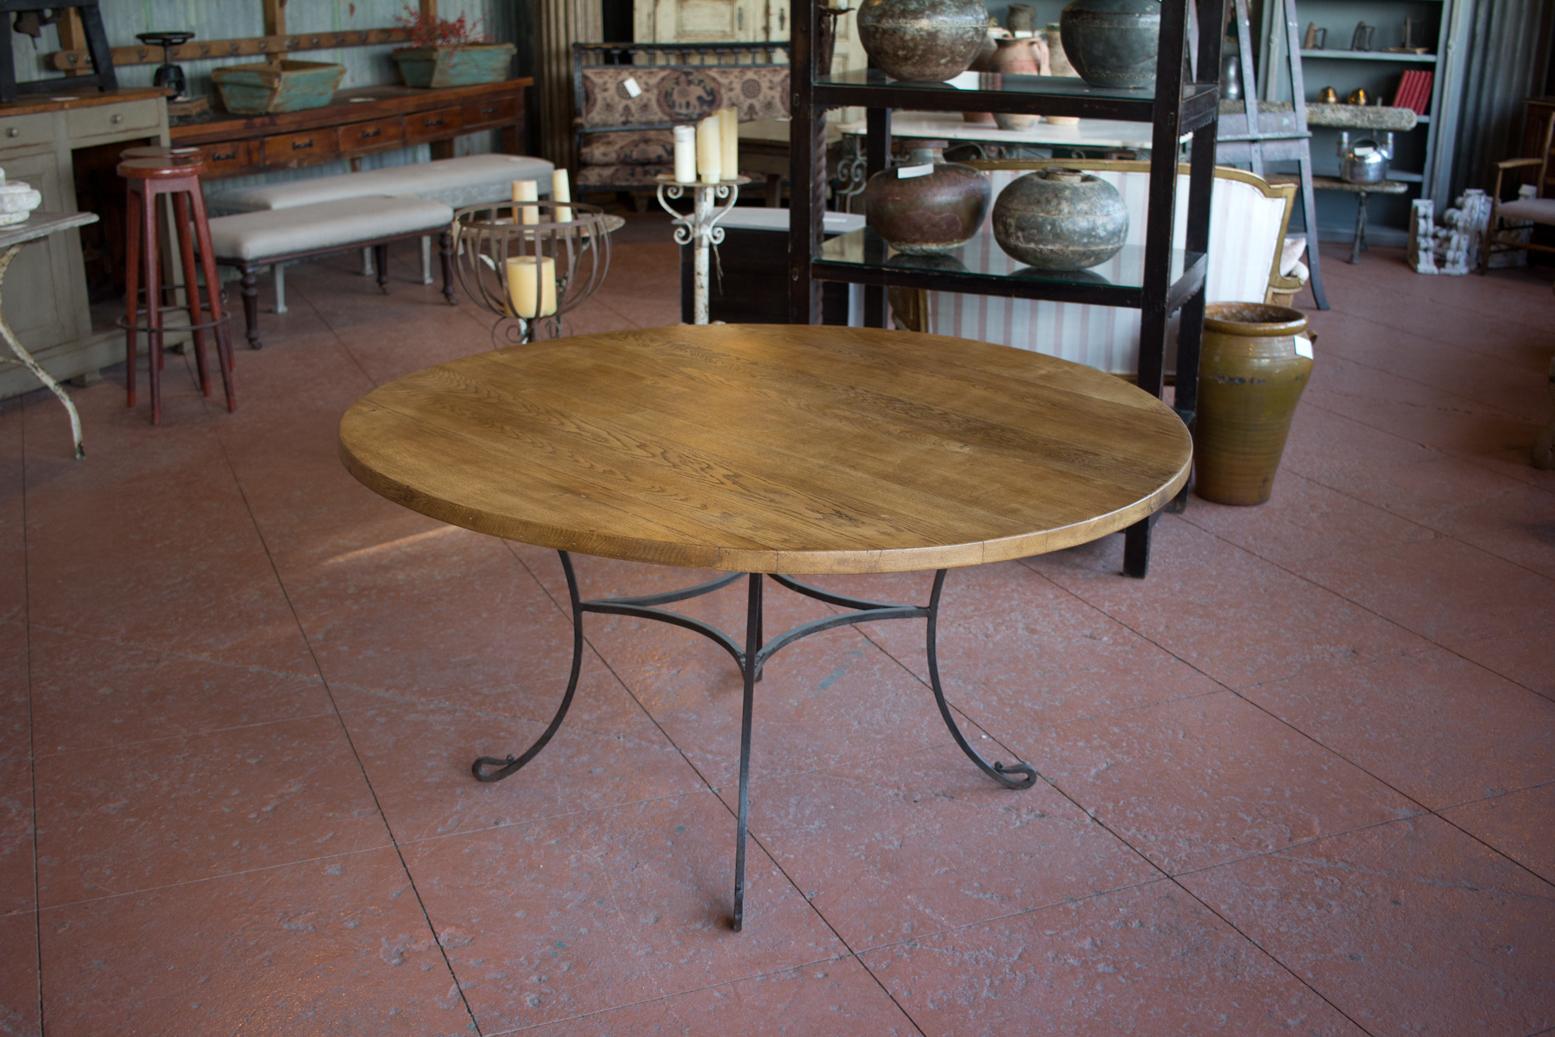 Vintage round table with handcrafted wrought iron base and oak top.